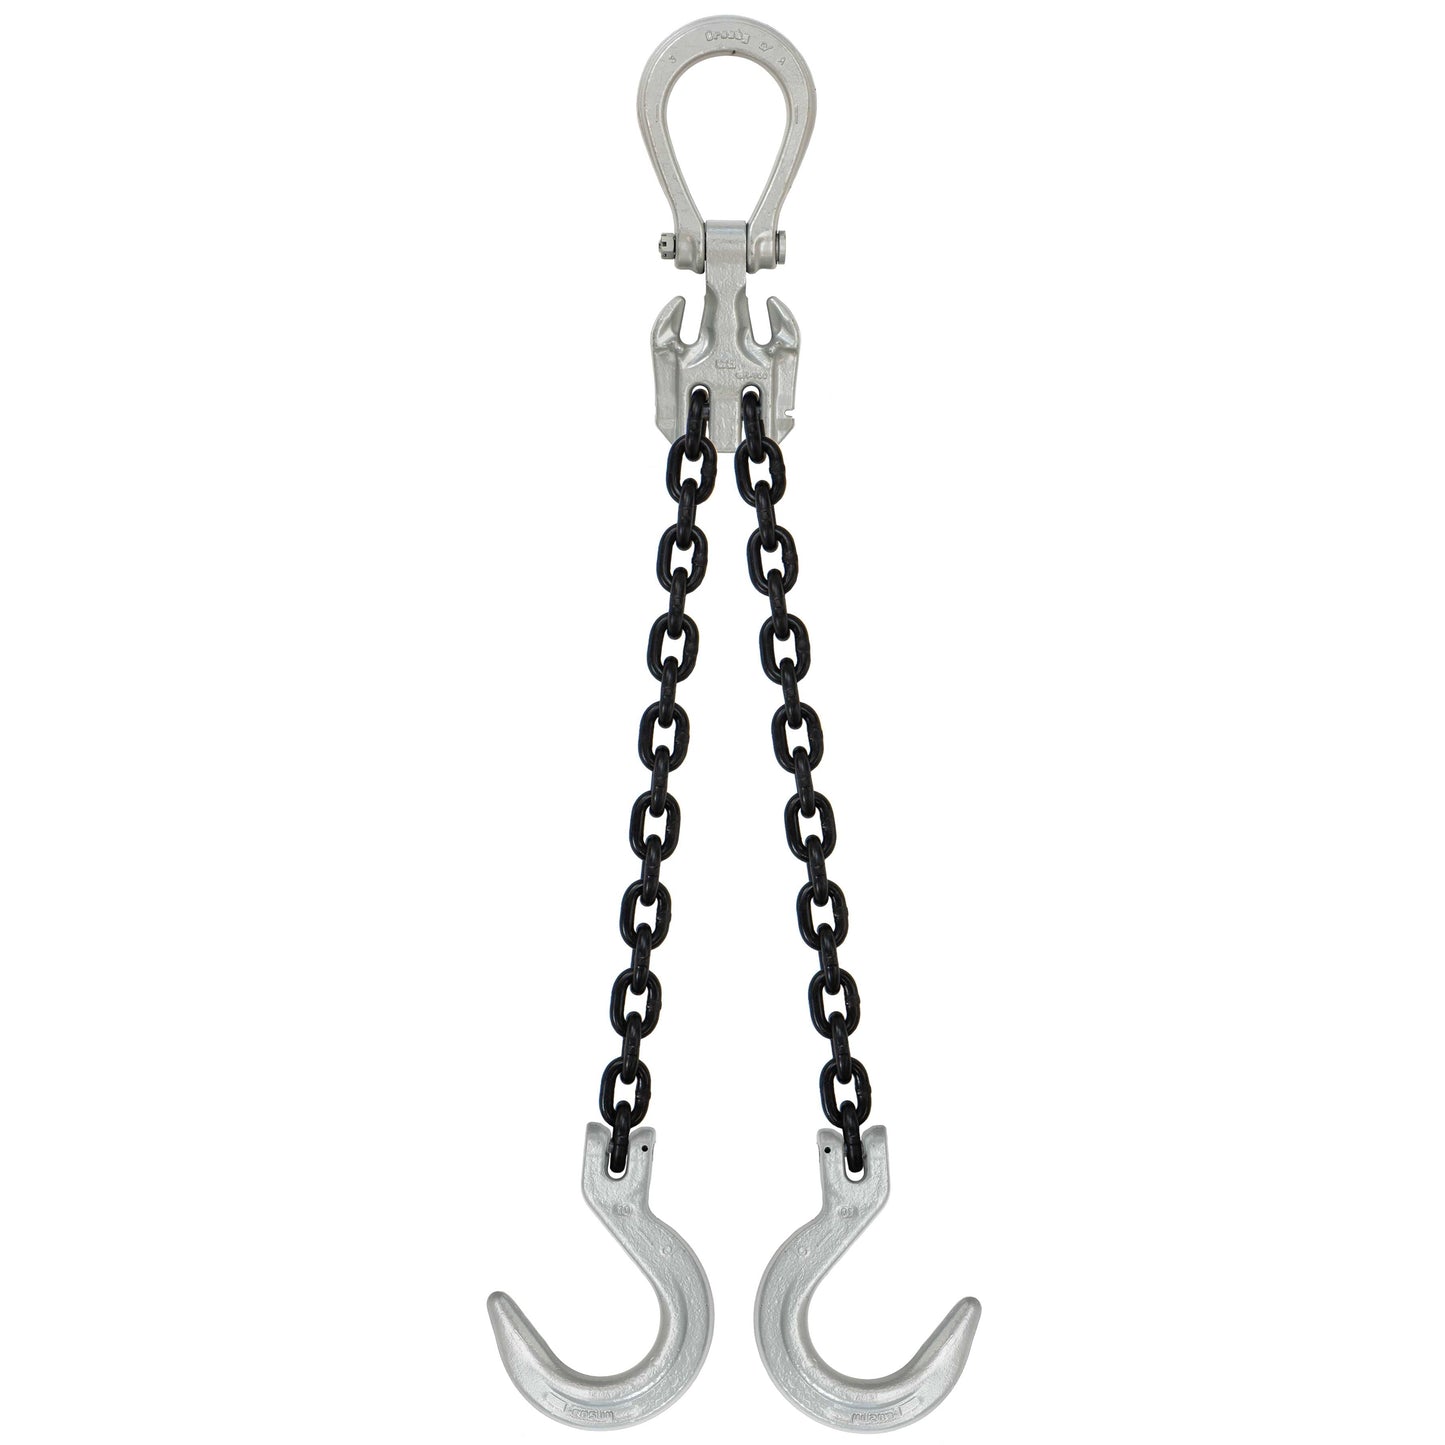 12 inch x 15 foot Domestic Adjustable 2 Leg Chain Sling w Crosby Foundry Hooks Grade 100 image 1 of 2